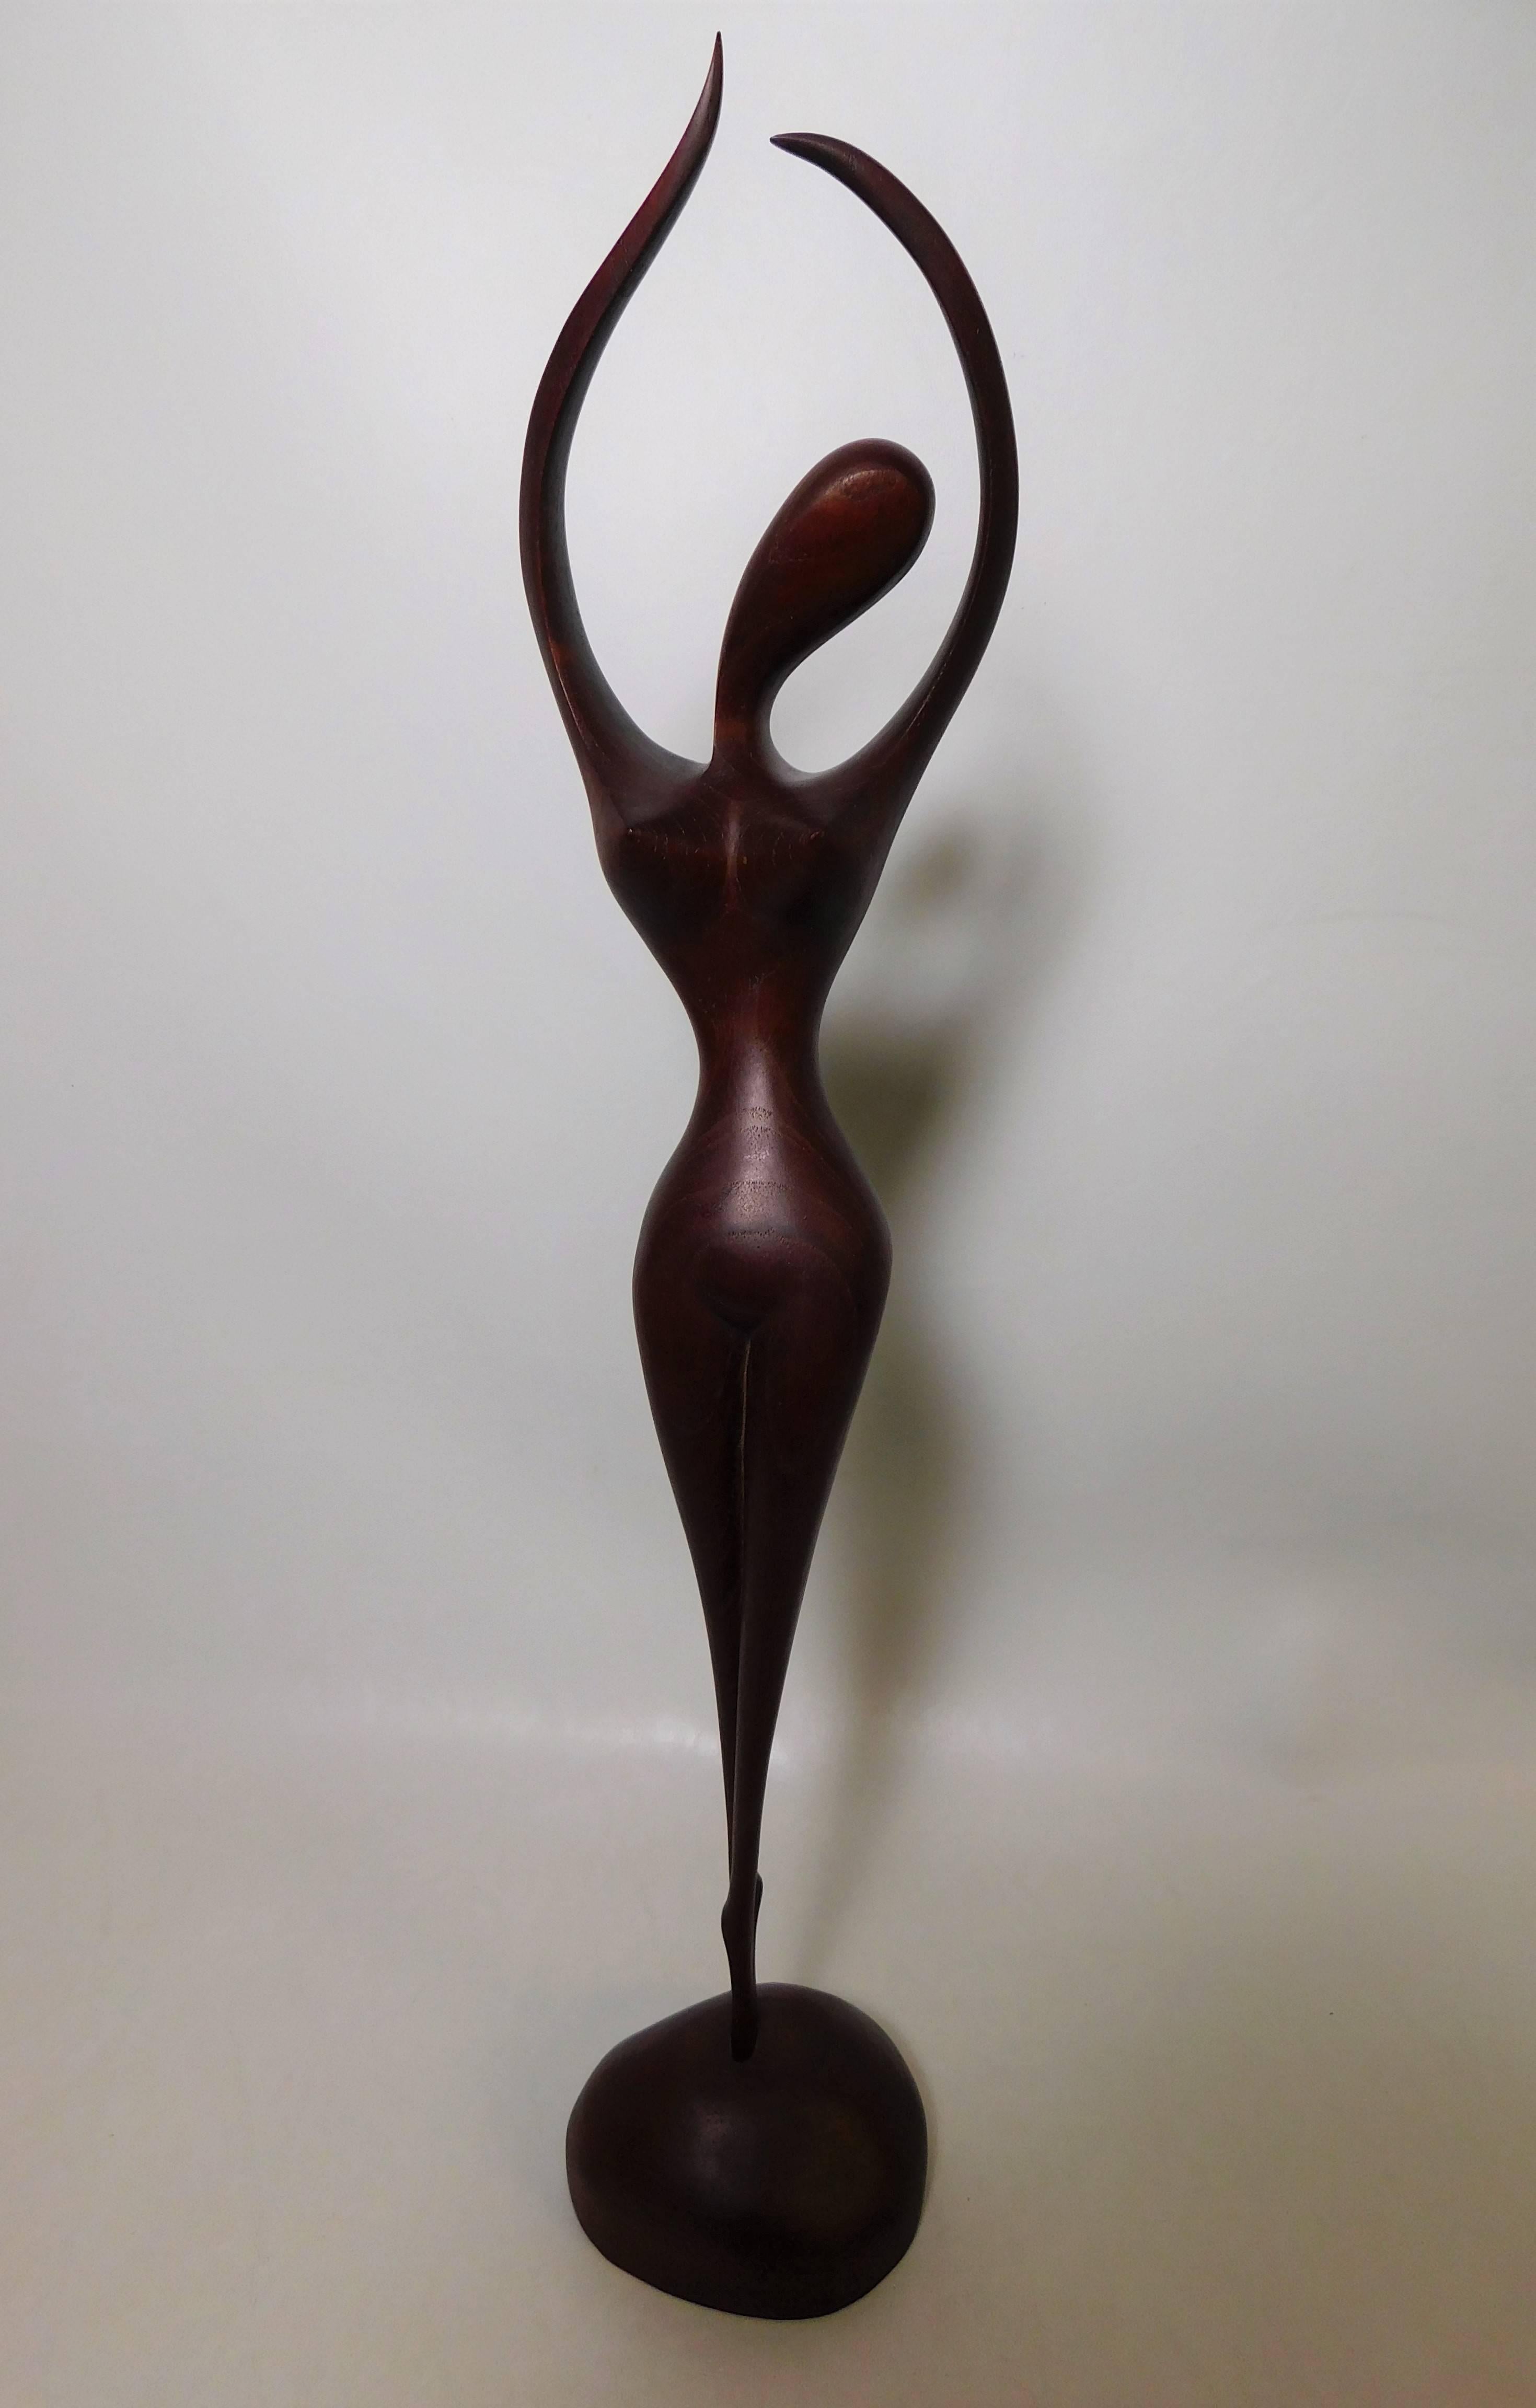 This Mid-Century Modern Danish teak figurative sculpture is signed but the artist is unknown. It was imported to Canada by the Denmark furniture company Toronto.